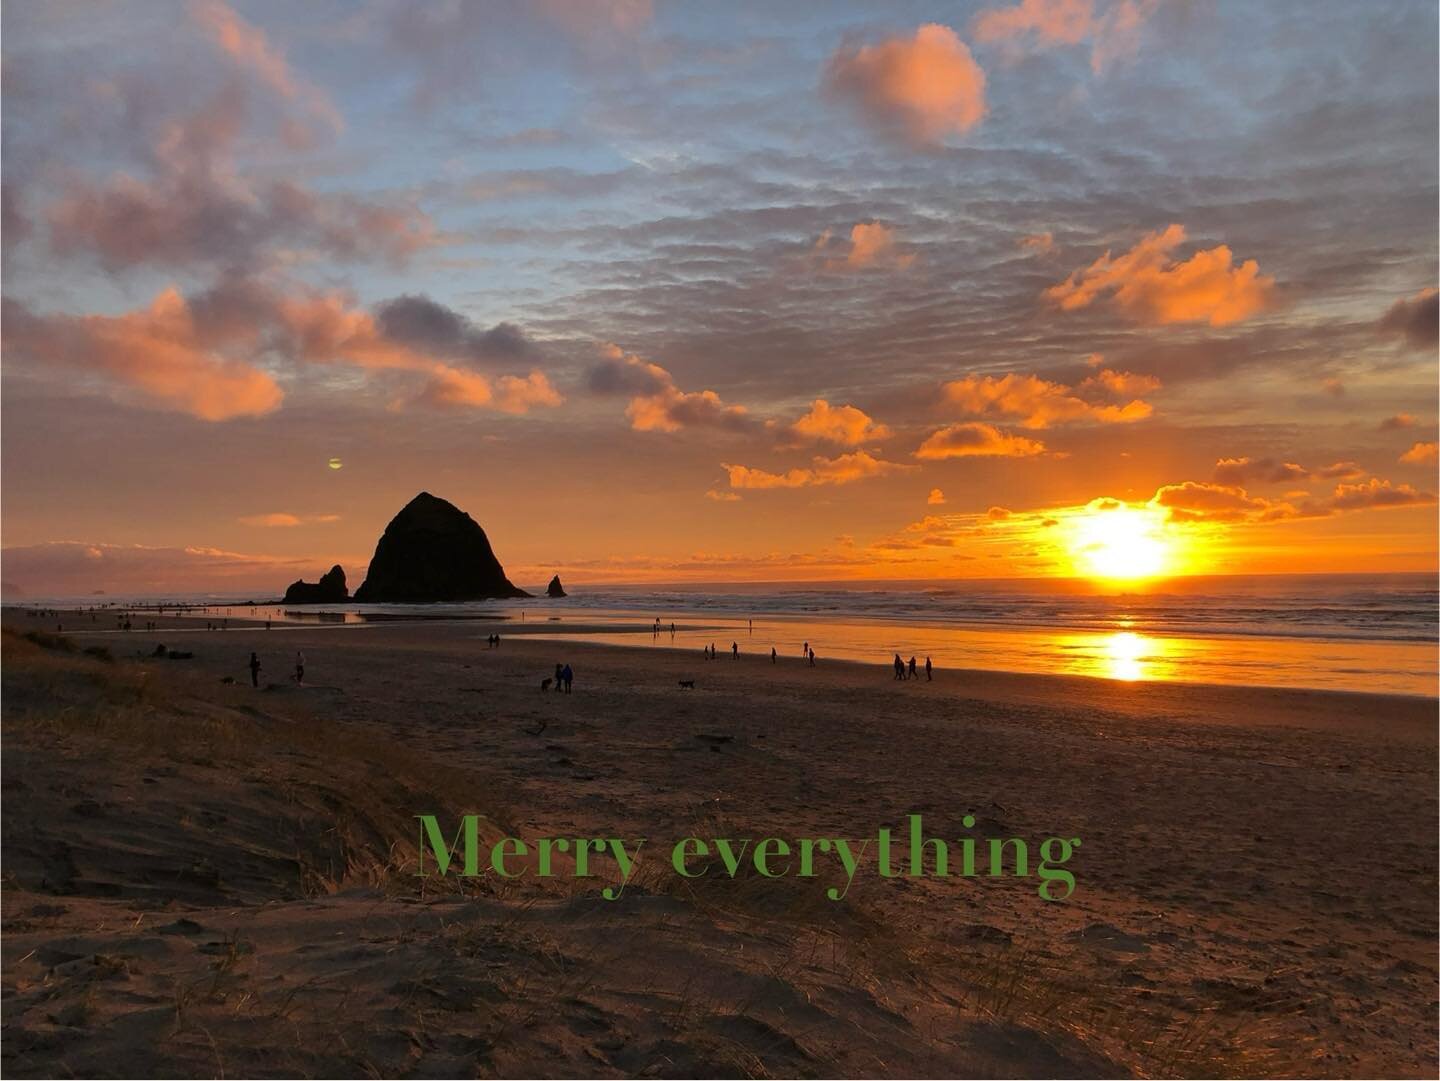 Merry all the things! Have a wonderful holiday season with yours